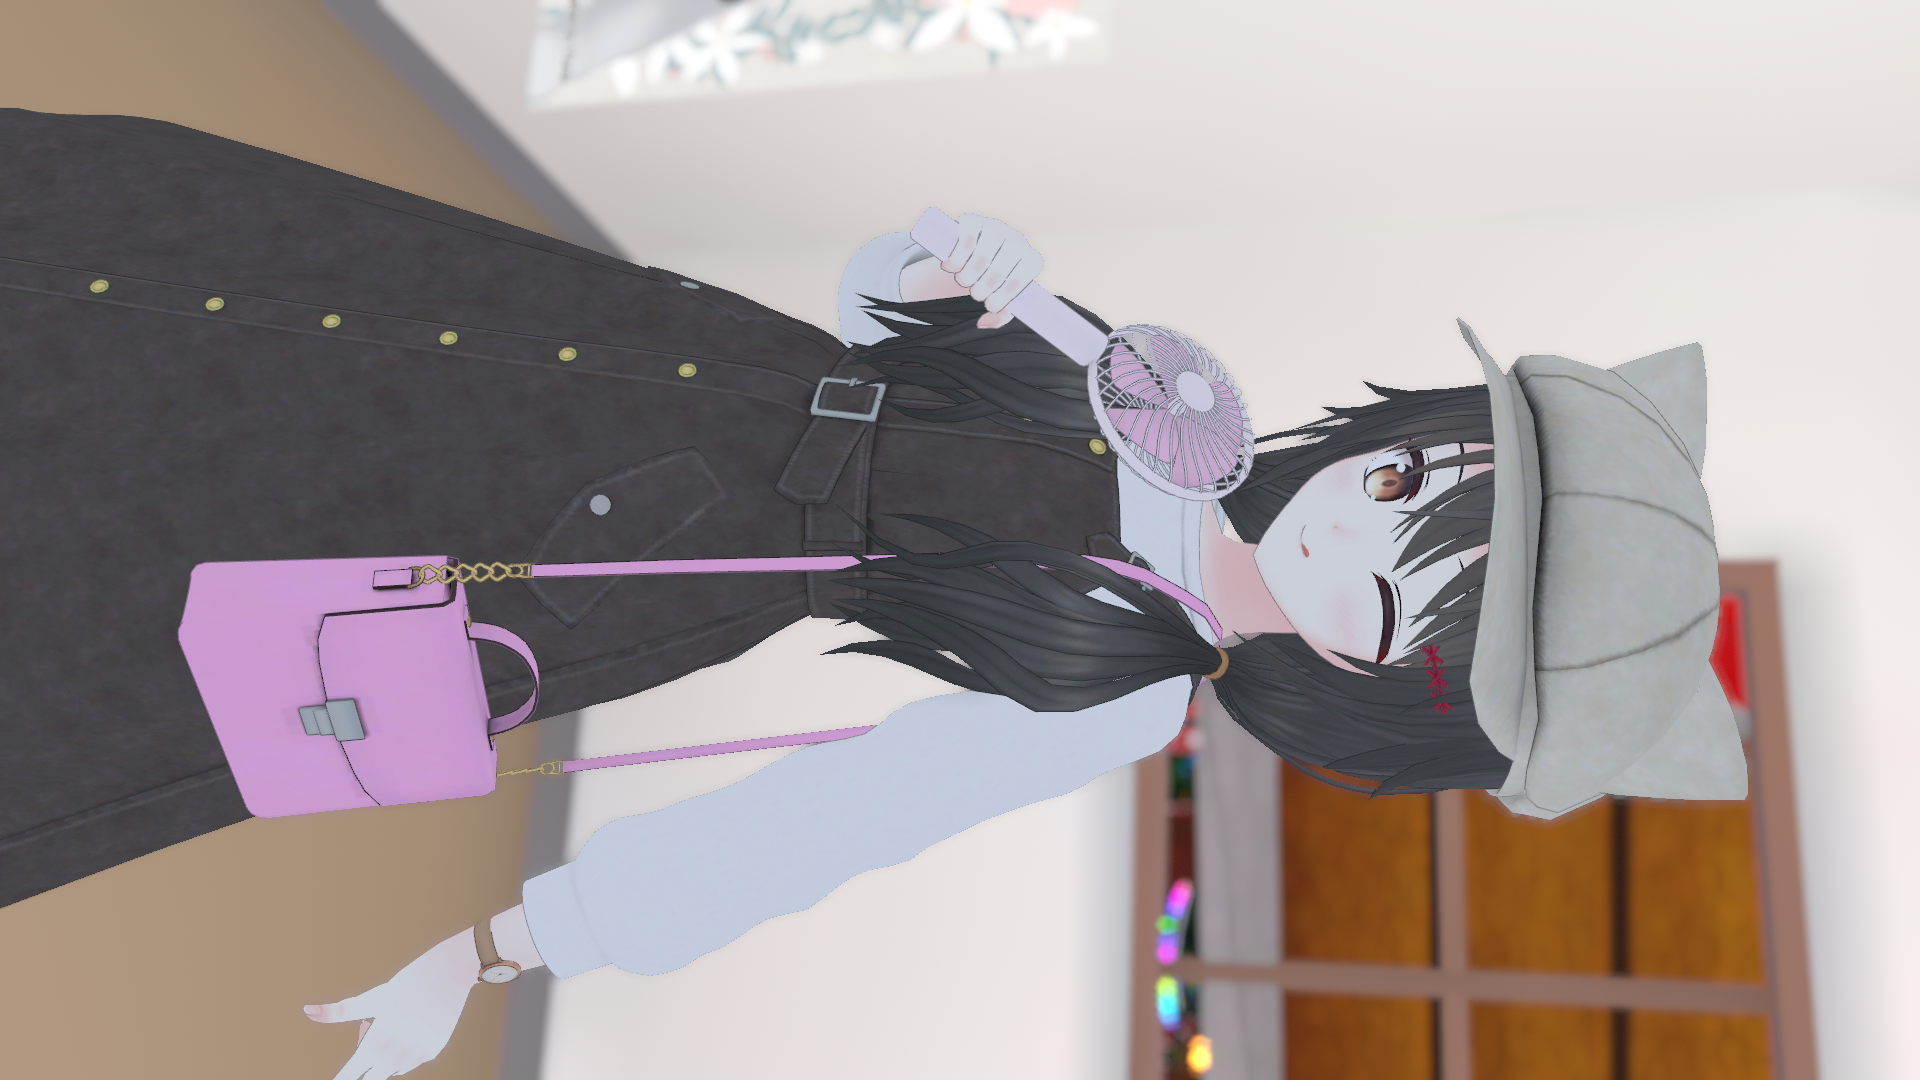 VRChat_1920x1080_2021-12-05_04-58-15.403.png